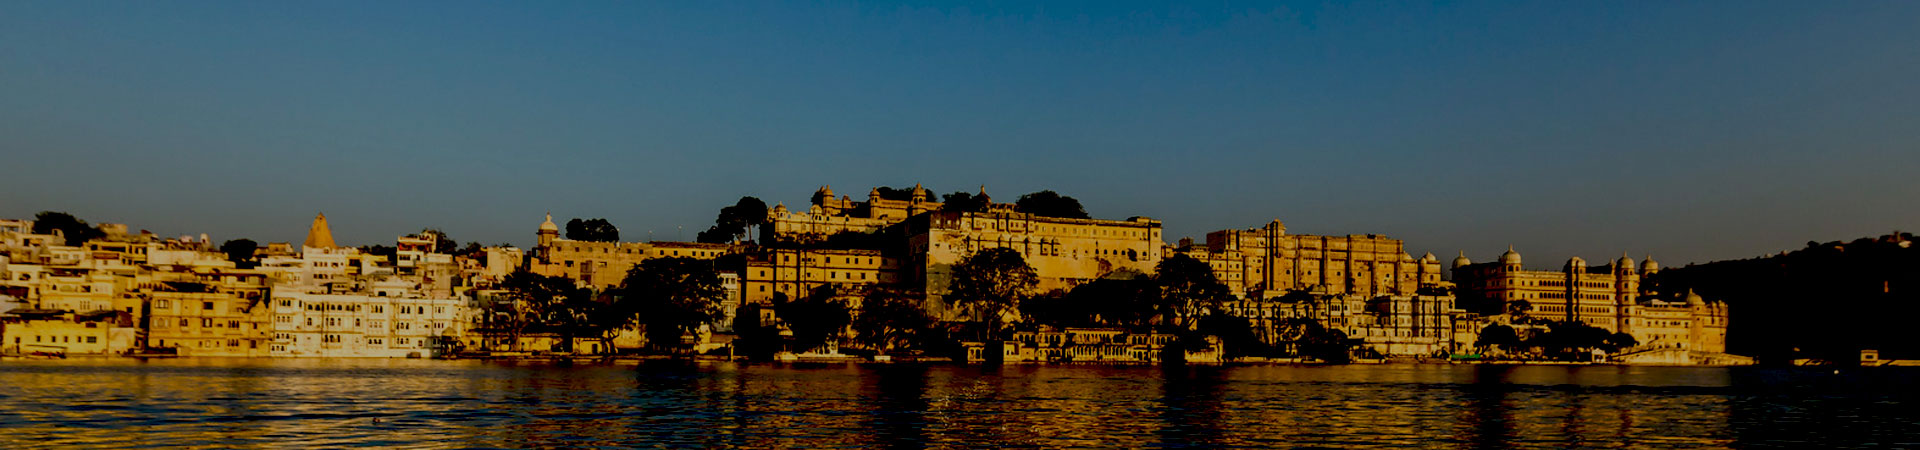 Udaipur Tours and Taxi